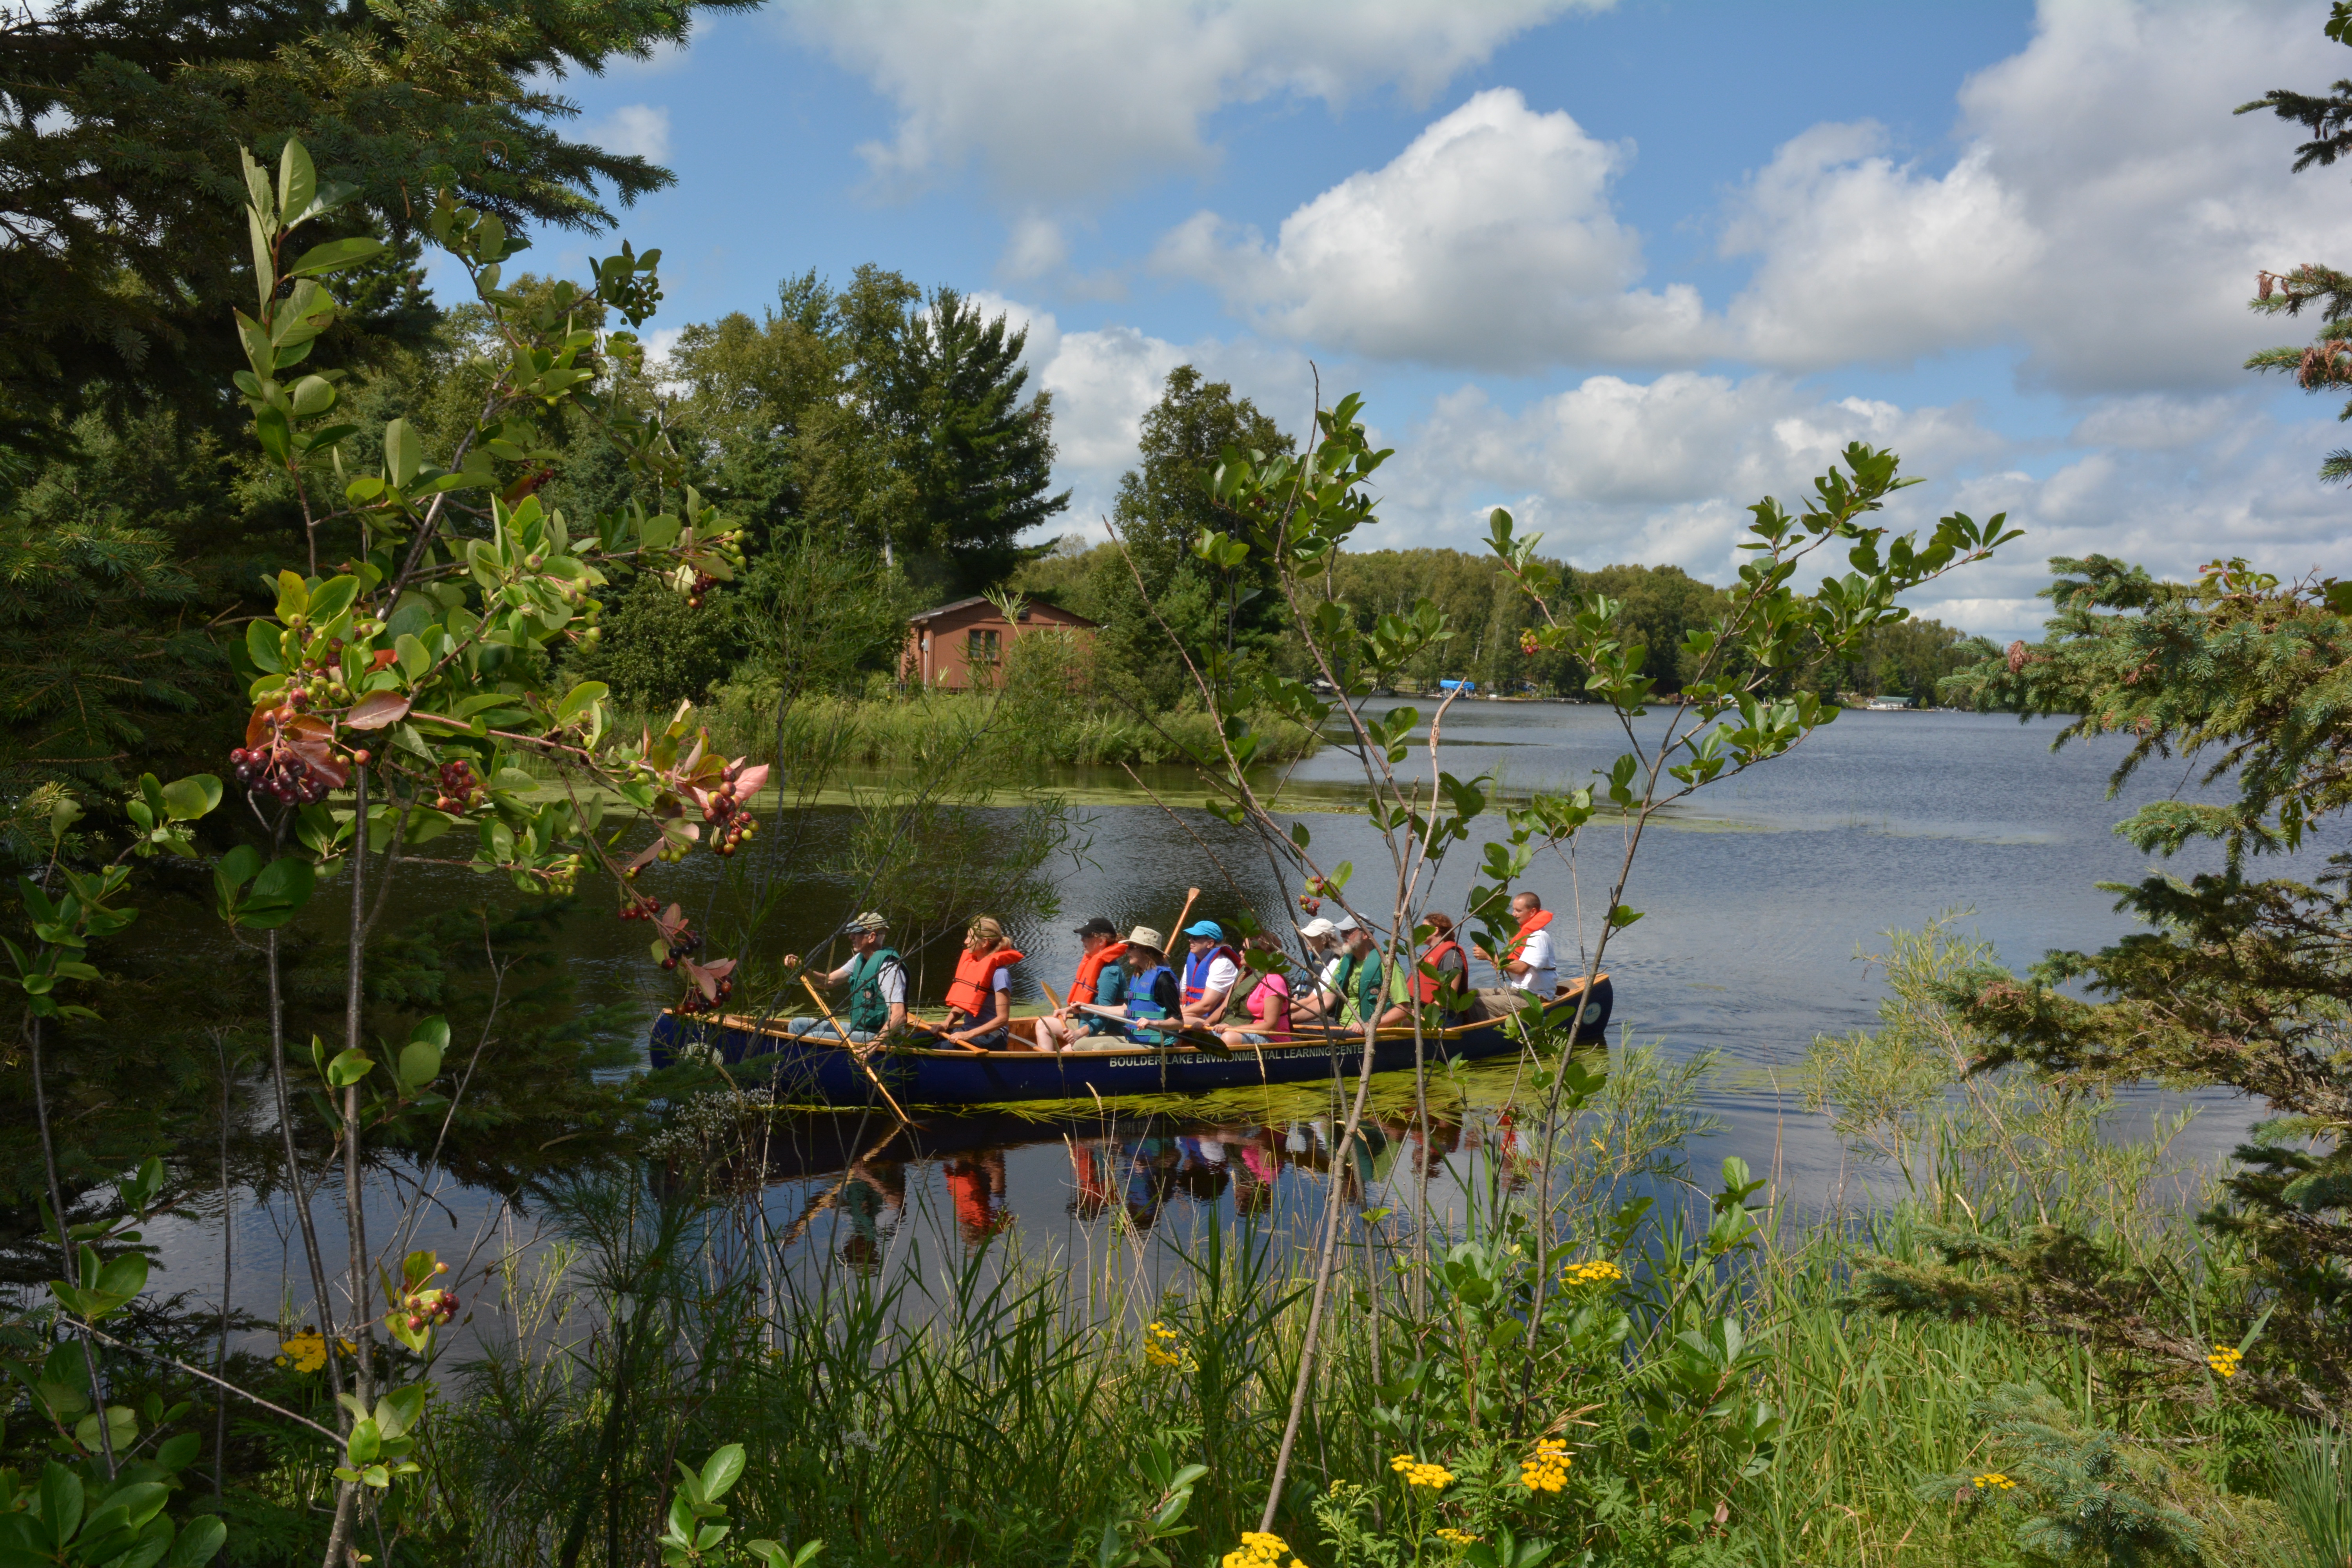 A group of people in a canoe on a lake.